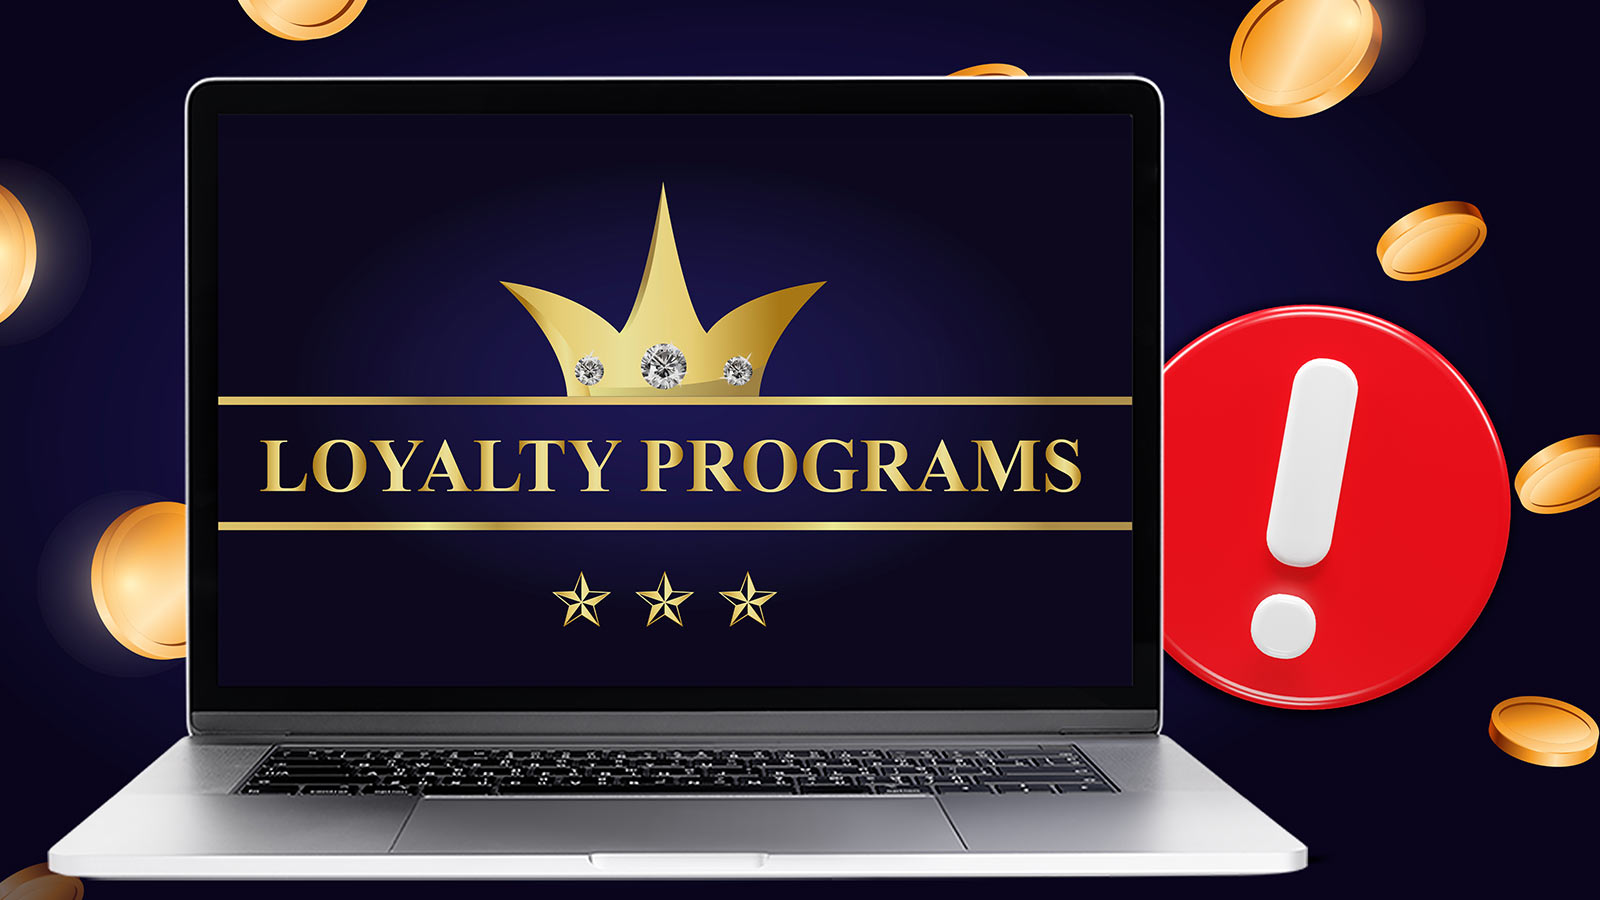 Are Online Casinos Loyalty Systems a Scam?